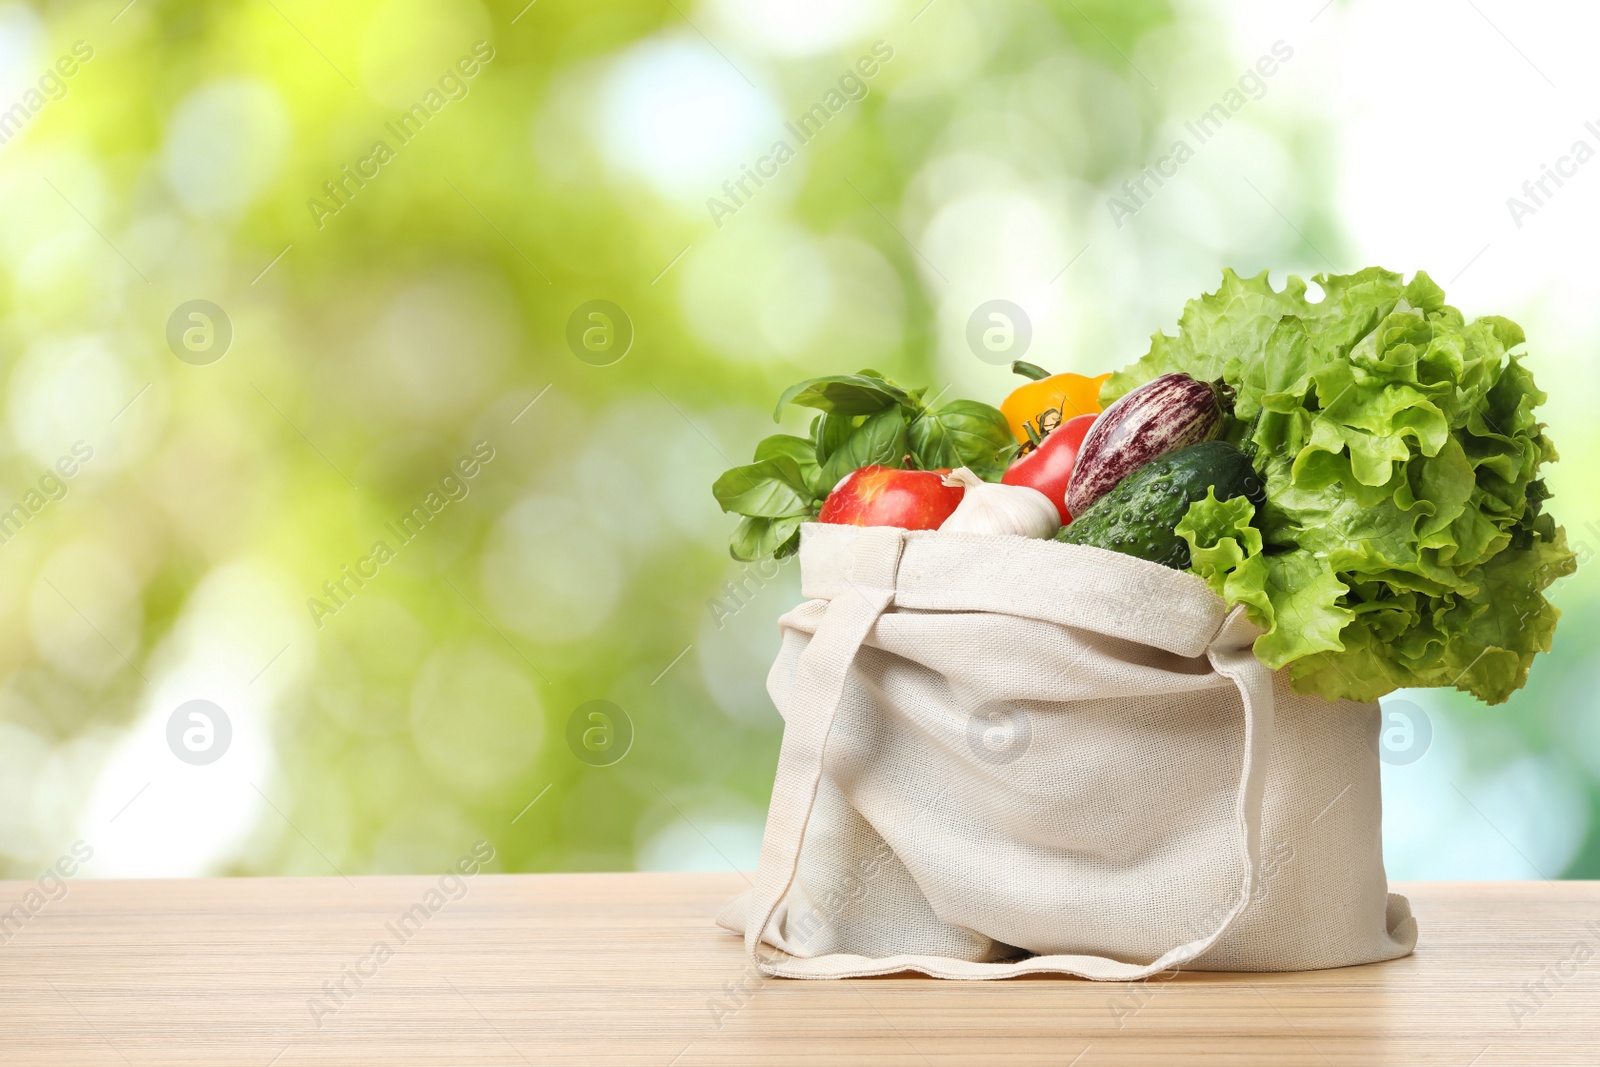 Image of Fresh vegetables in cloth bag on wooden table against blurred background. Space for text